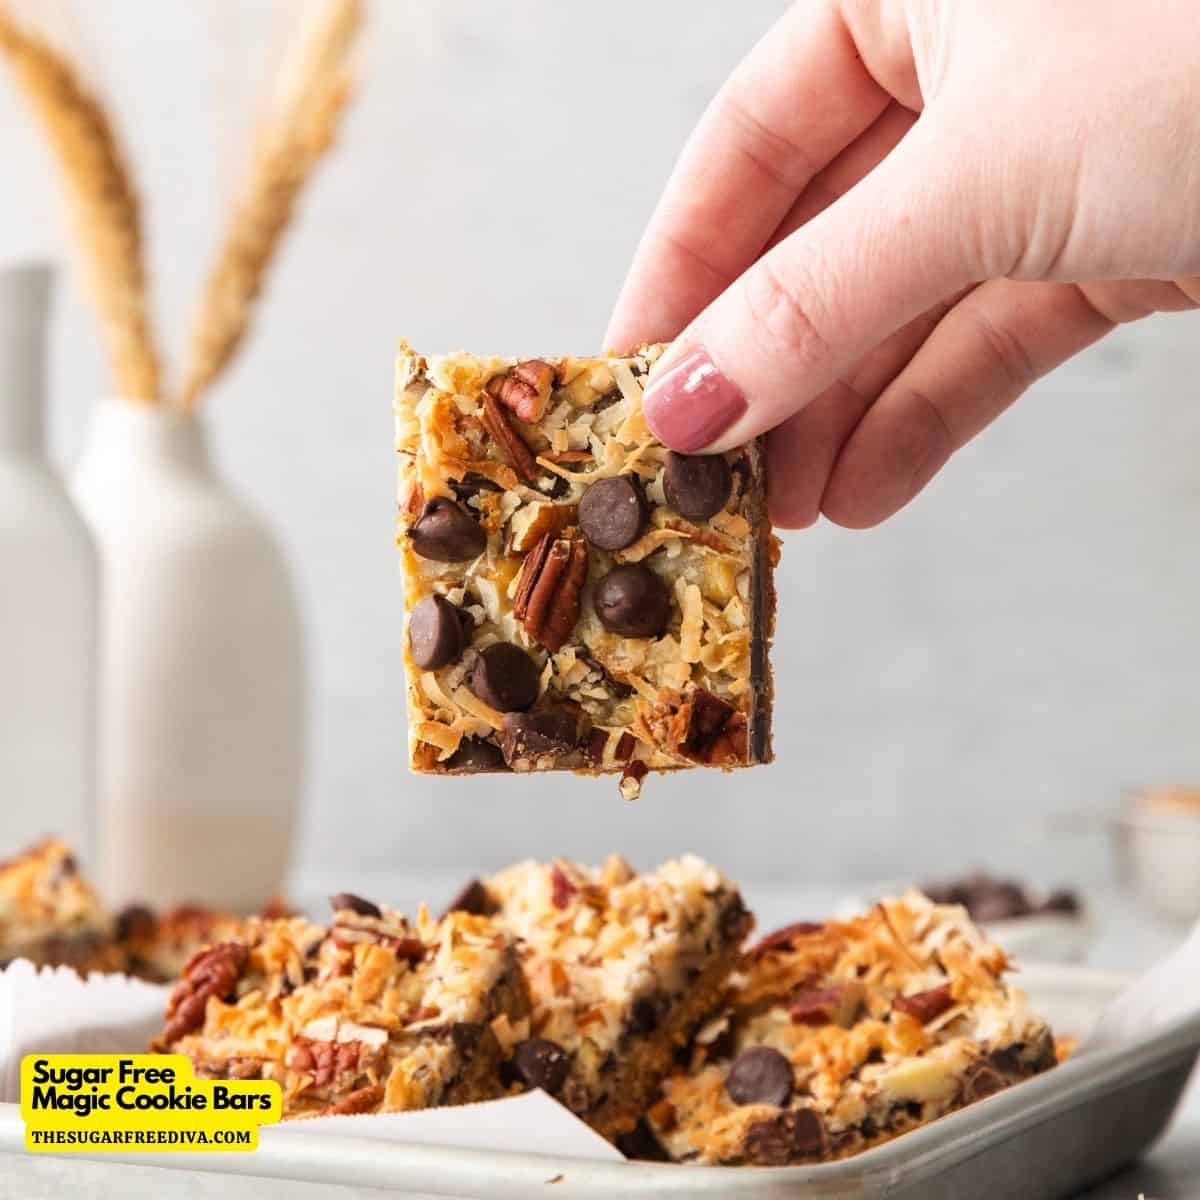 Sugar Free Magic Cookie Bars, a simple and delicious layered dessert or snack recipe made with chocolate and pecans with no added sugar.